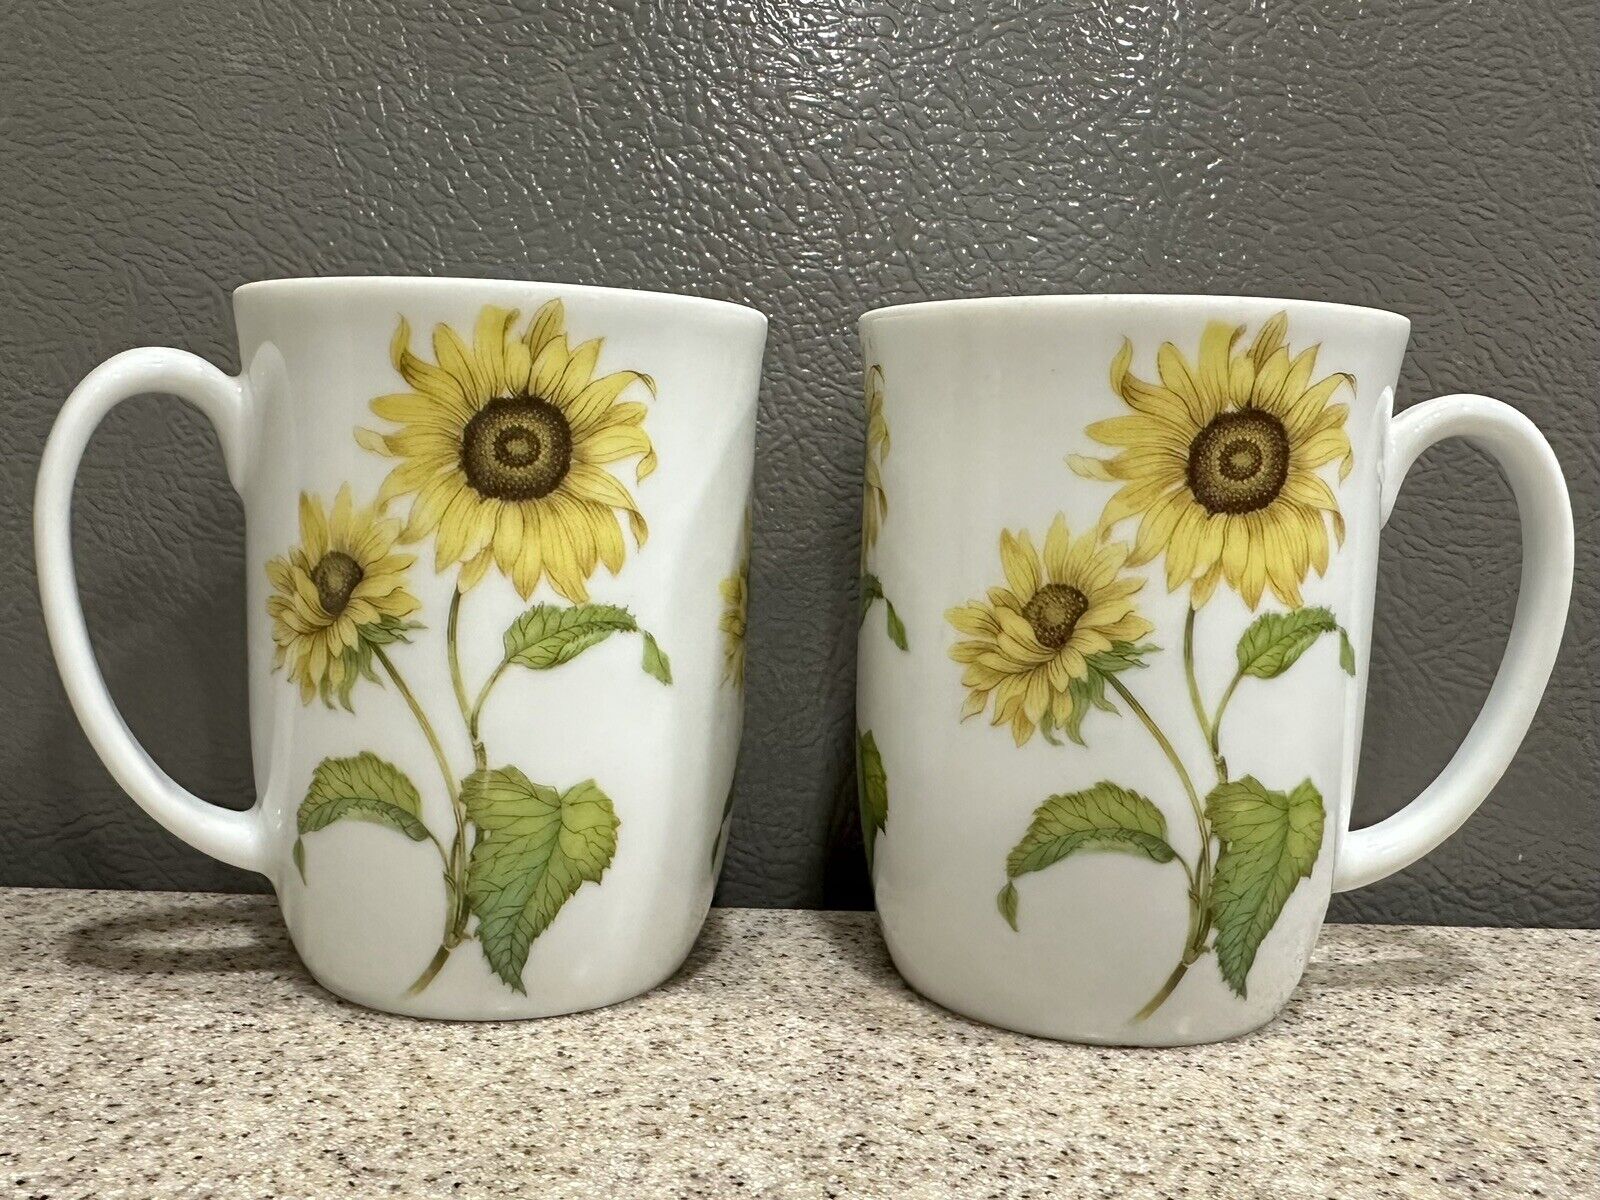 2 Spal Porcelanas Made For Hotchow Collection In Portugal Coffee Mugs Sunflowers